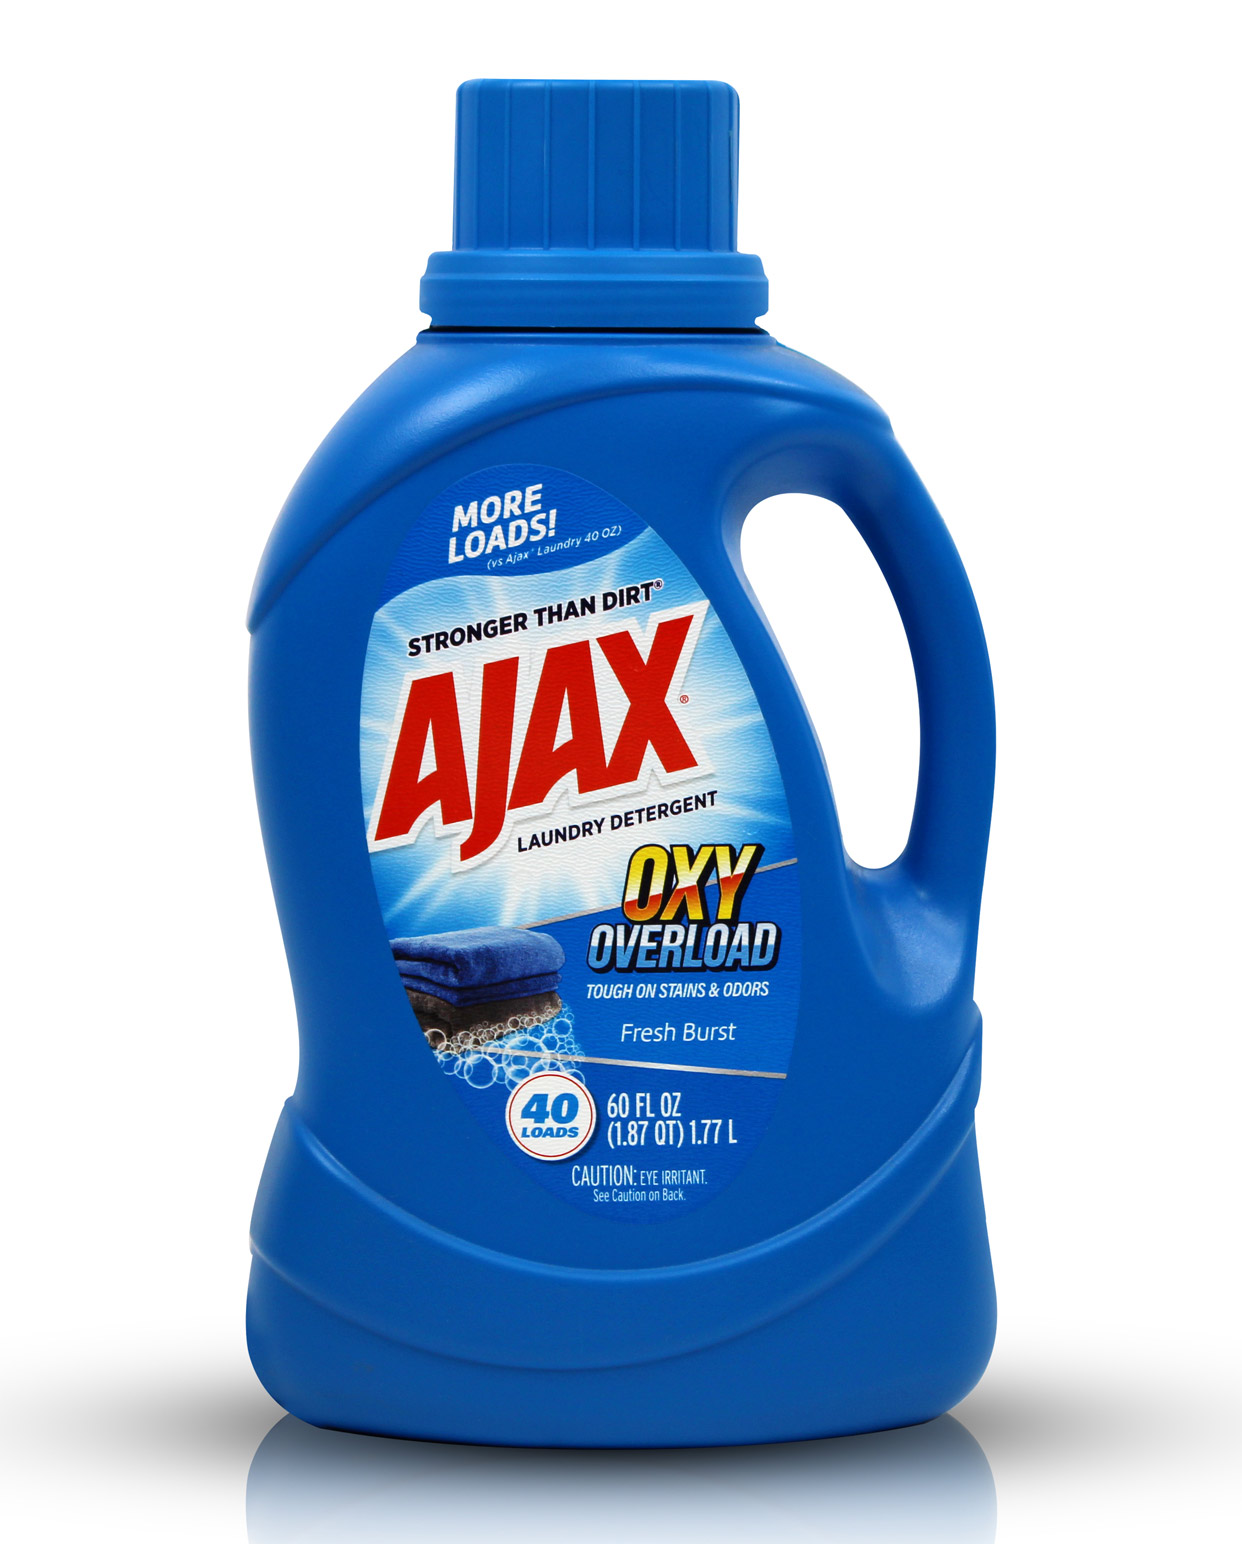 60oz bottle of AJAX Oxygen-enhanced laundry detergent Oxy Overload with a clear label.